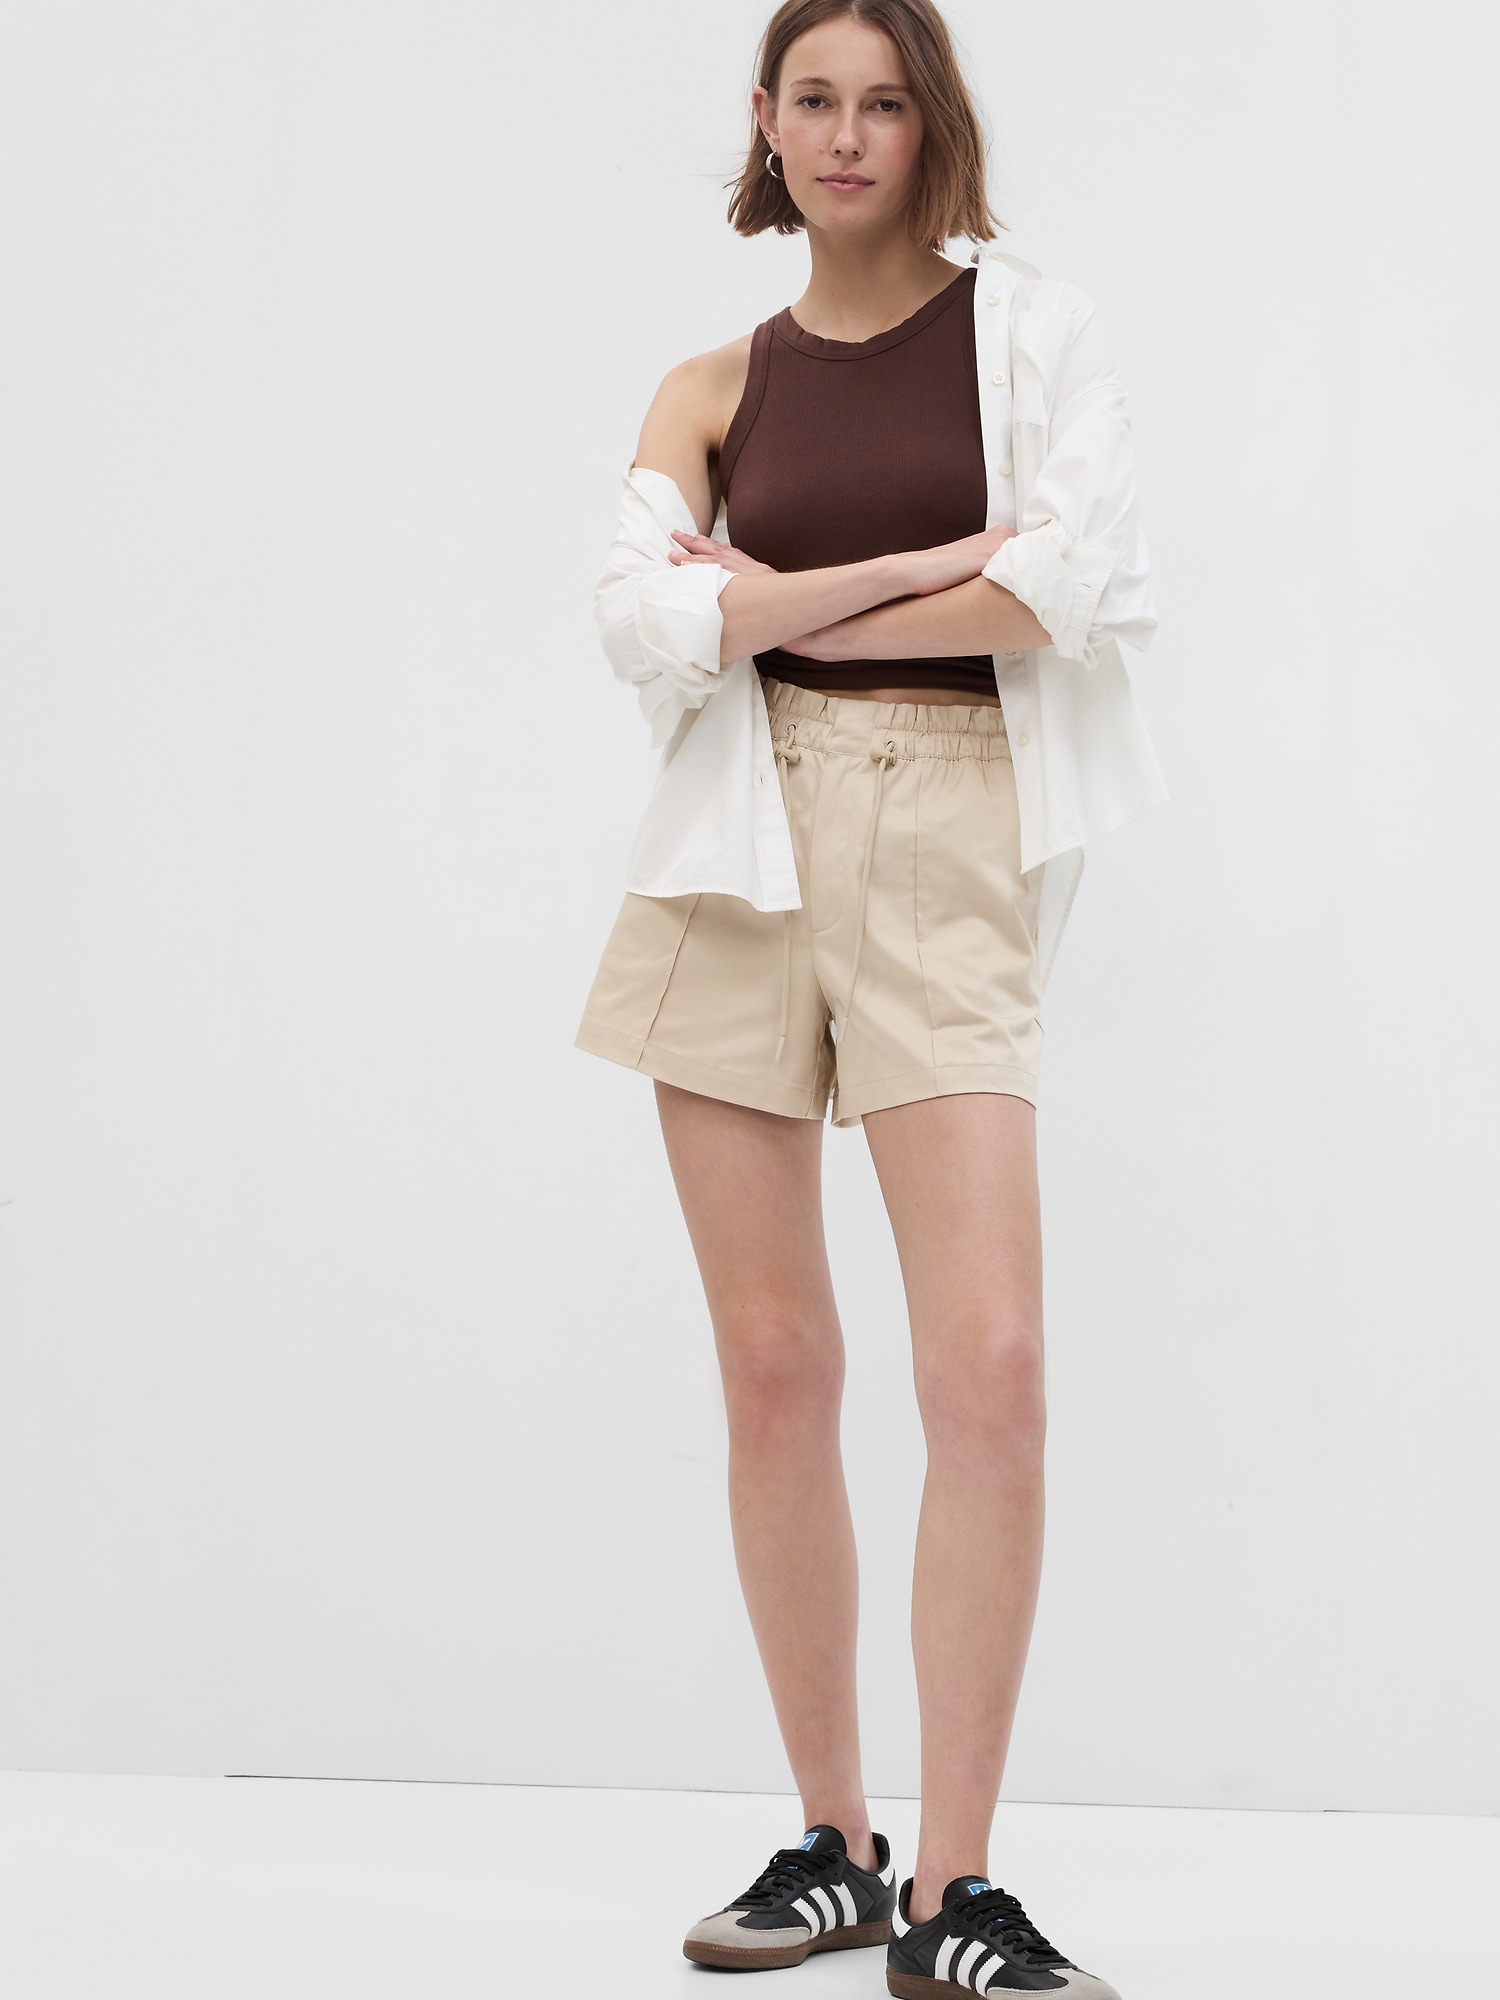 Bungee Pull-On Shorts | Gap